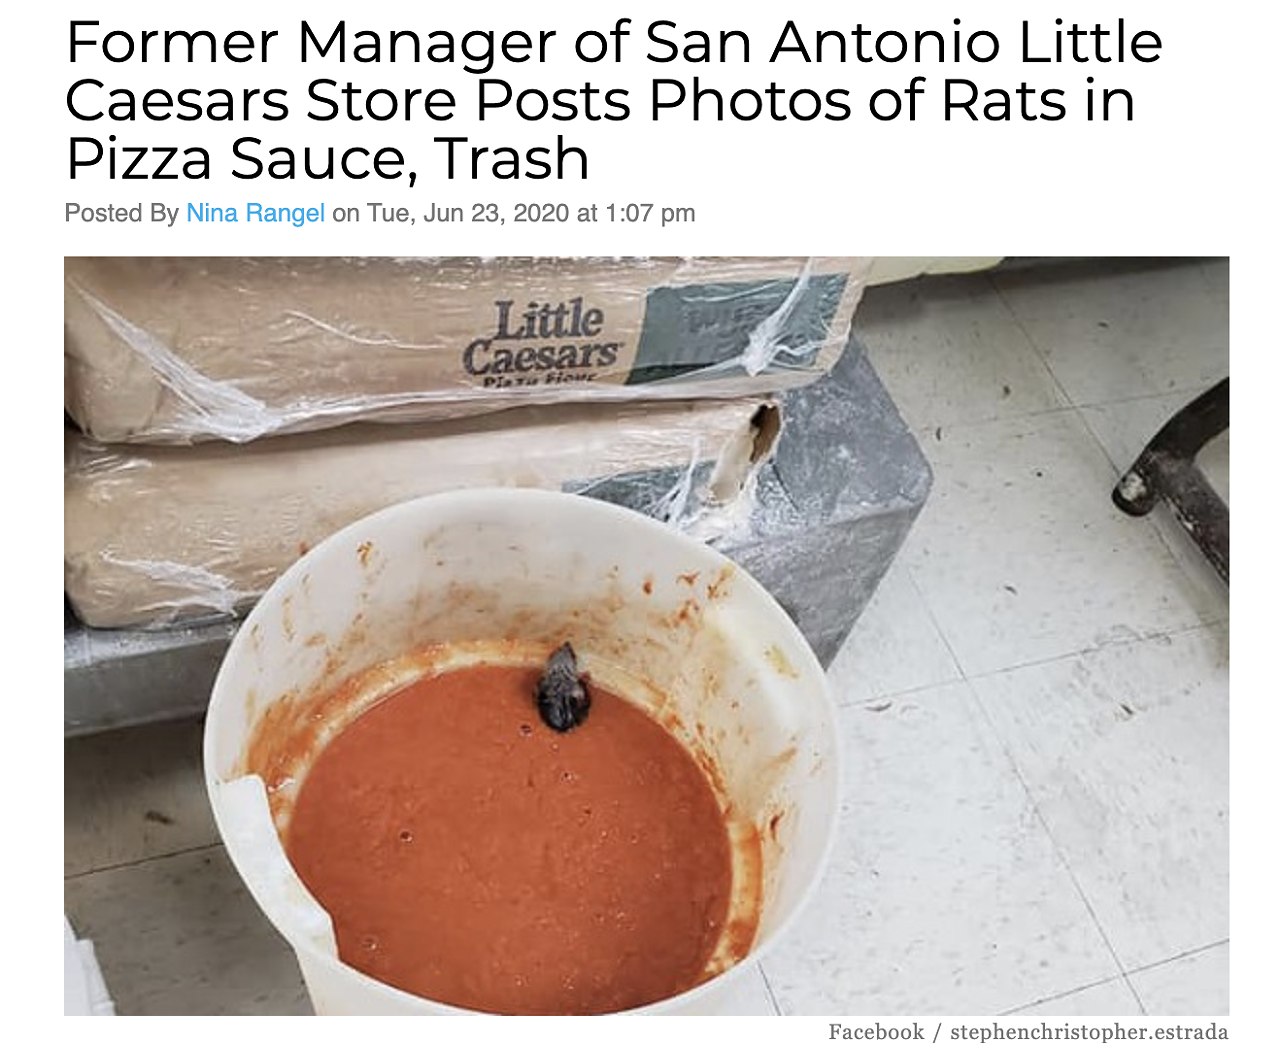 In a Facebook post, former Little Caesars store manager Stephen Estrada announced he'd quit his job with the pizza chain after battling a four-month rat infestation at his South San Antonio location. Read more here.